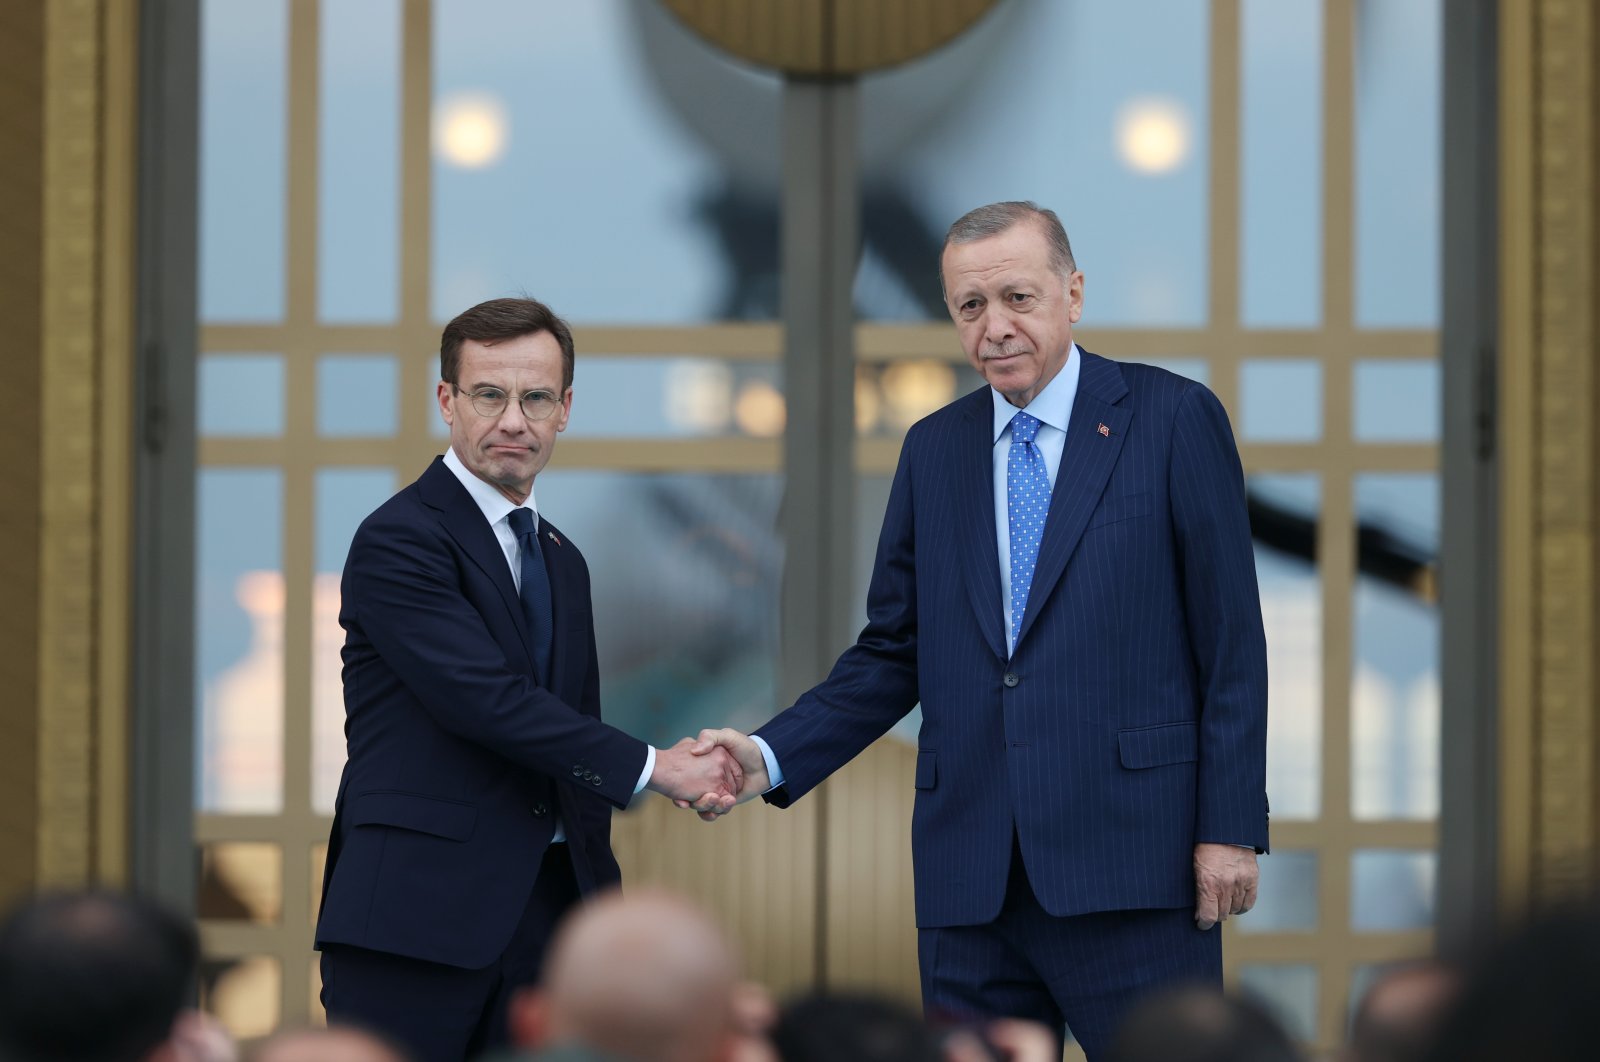 President Recep Tayyip Erdoğan, Swedish Prime Minister Ulf Kristersson shake hands following an official ceremony in Ankara, Nov. 8, 2022. (AA Photo)